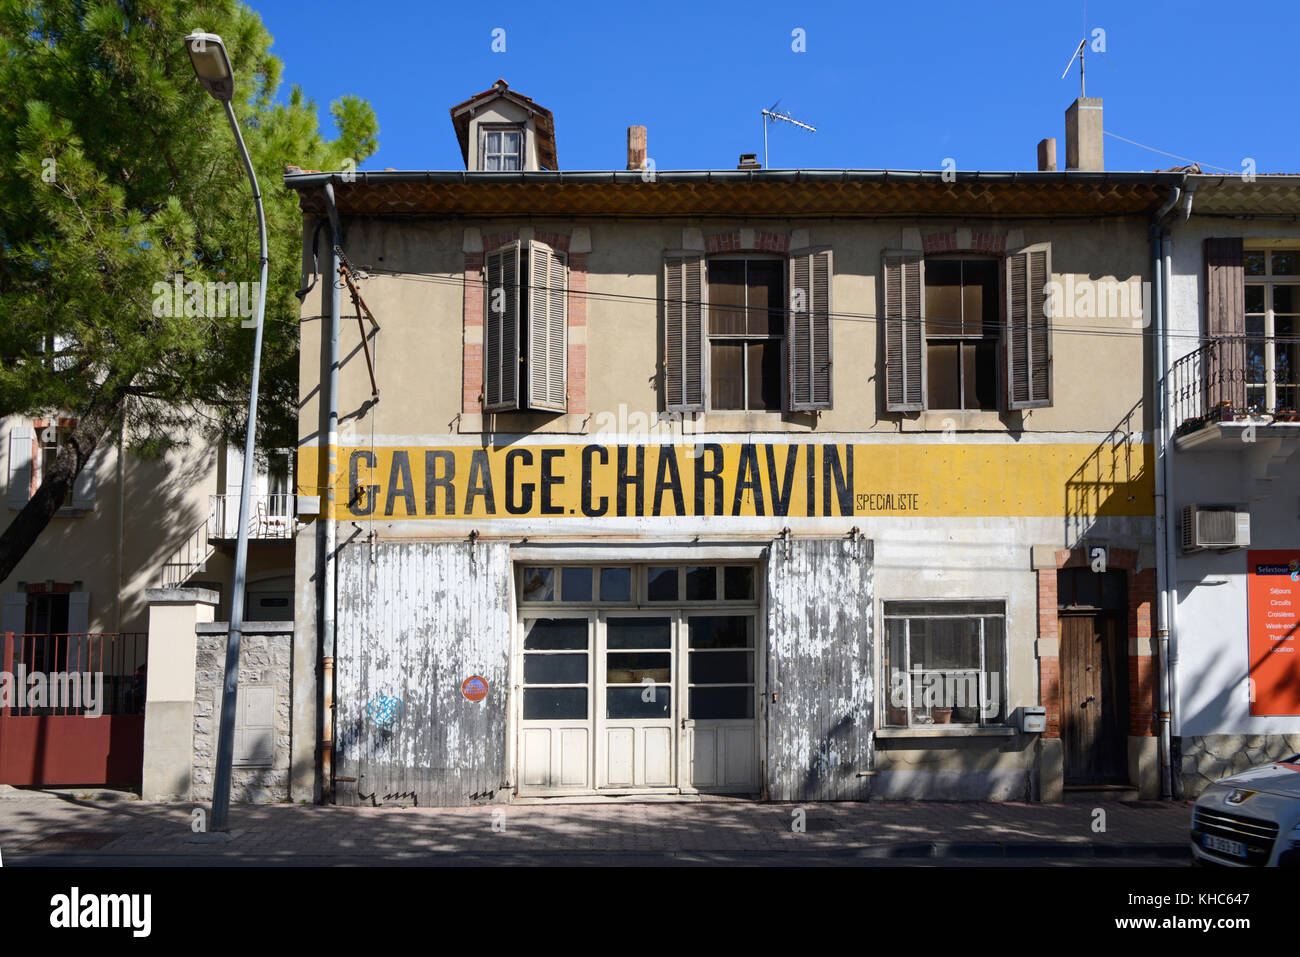 Abandoned, Vacant or Closed Automobile Repair Shop, Workshop, Local Garage, or Small Business, Vaison-la-Romaine, Vaucluse, Provence, France Stock Photo